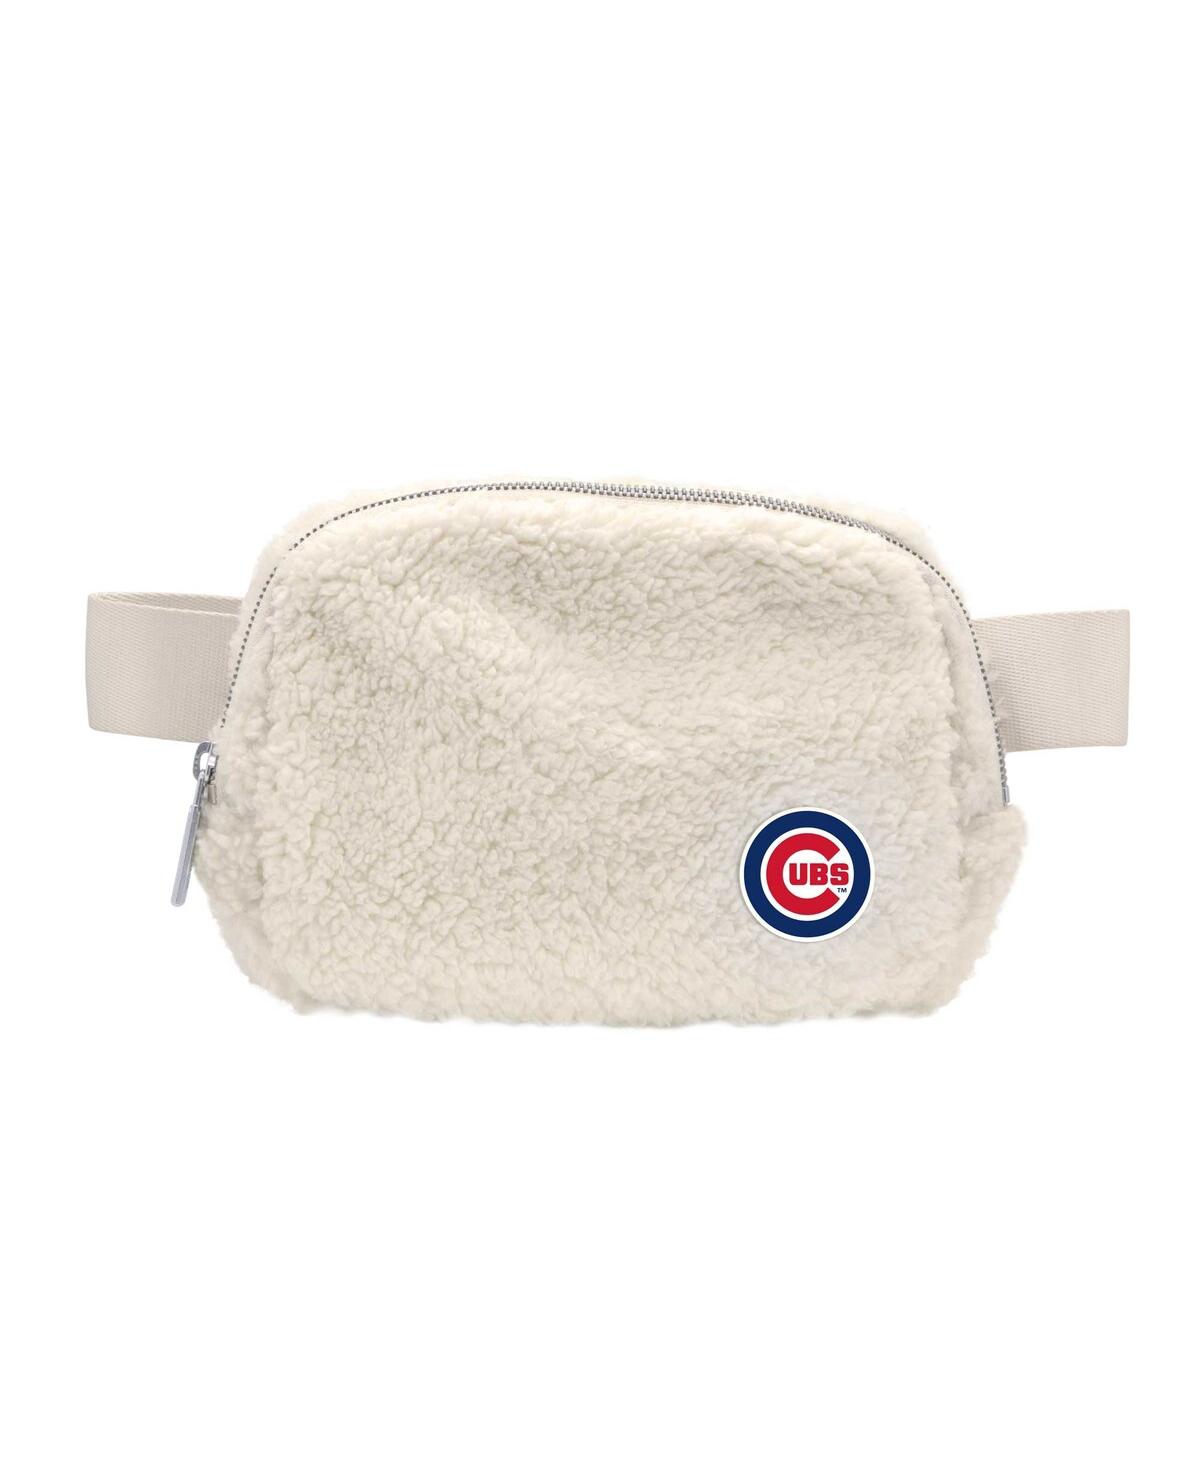 Men's and Women's Chicago Cubs Sherpa Fanny Pack - White